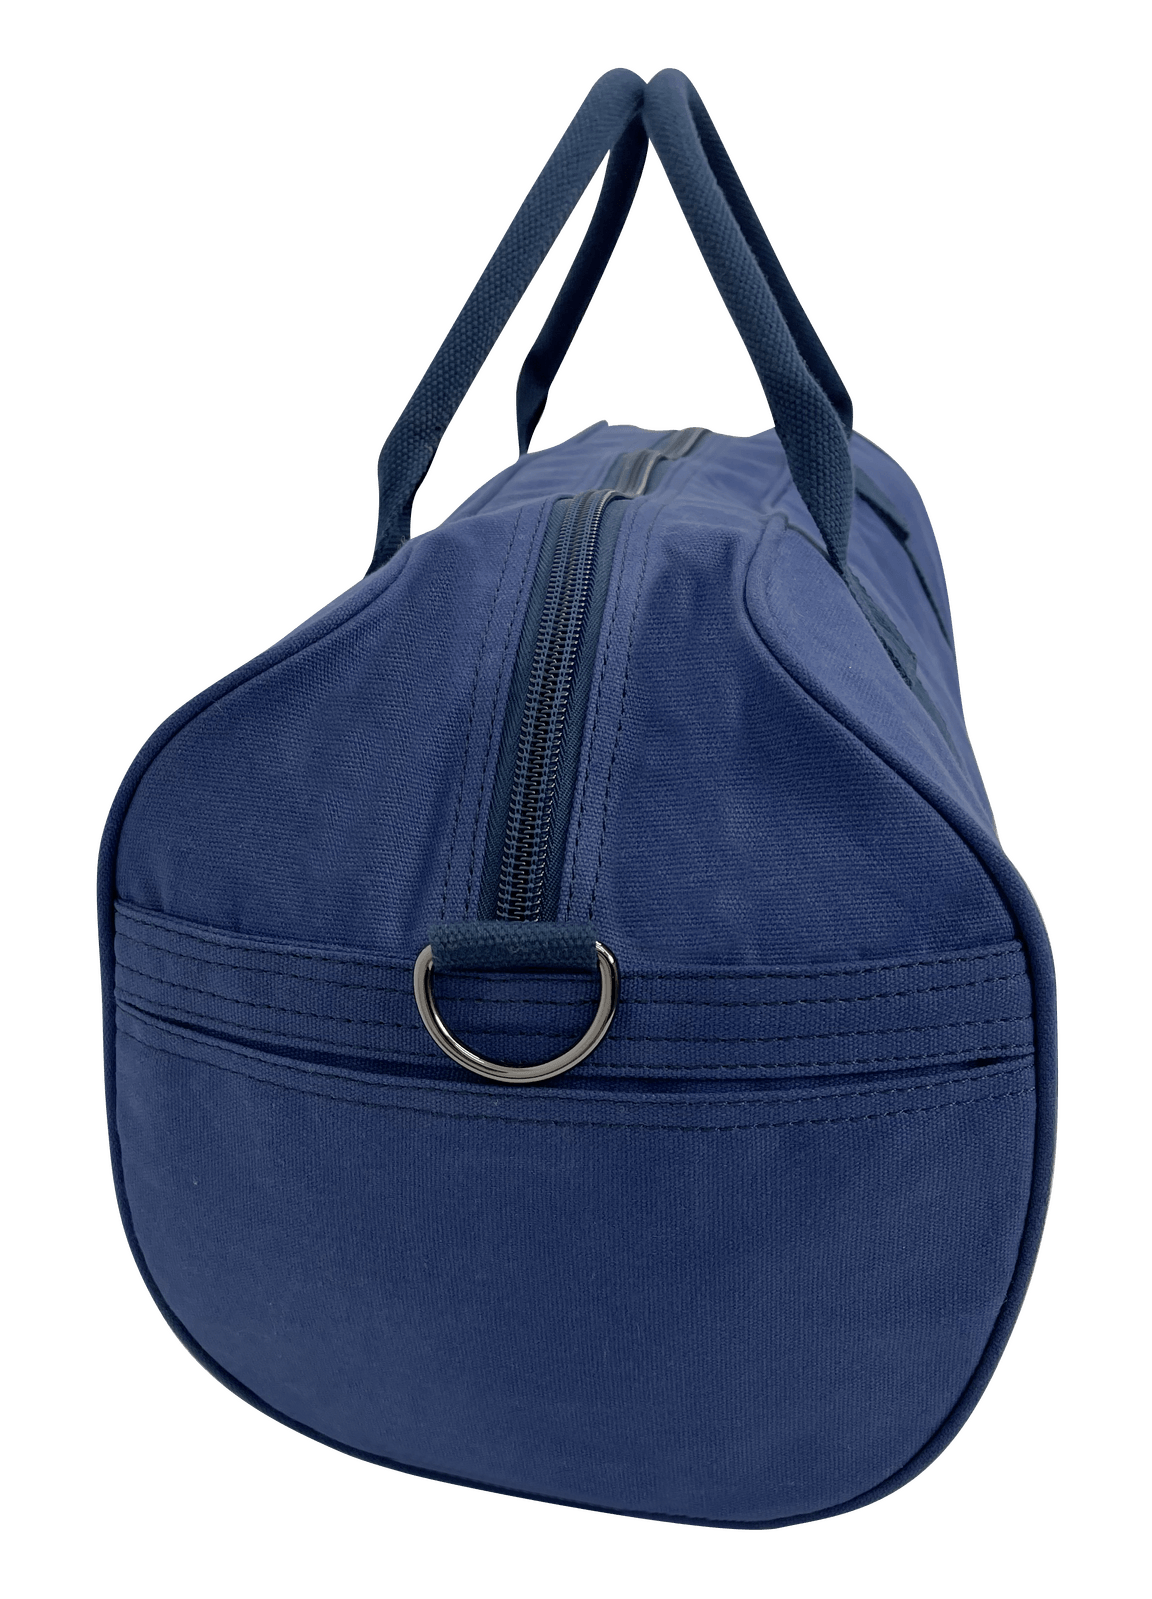 FIB Barrell Duffle Bag Travel Cotton Canvas Sports Luggage - Blue Products On Sale Australia | Gift & Novelty > Bags Category